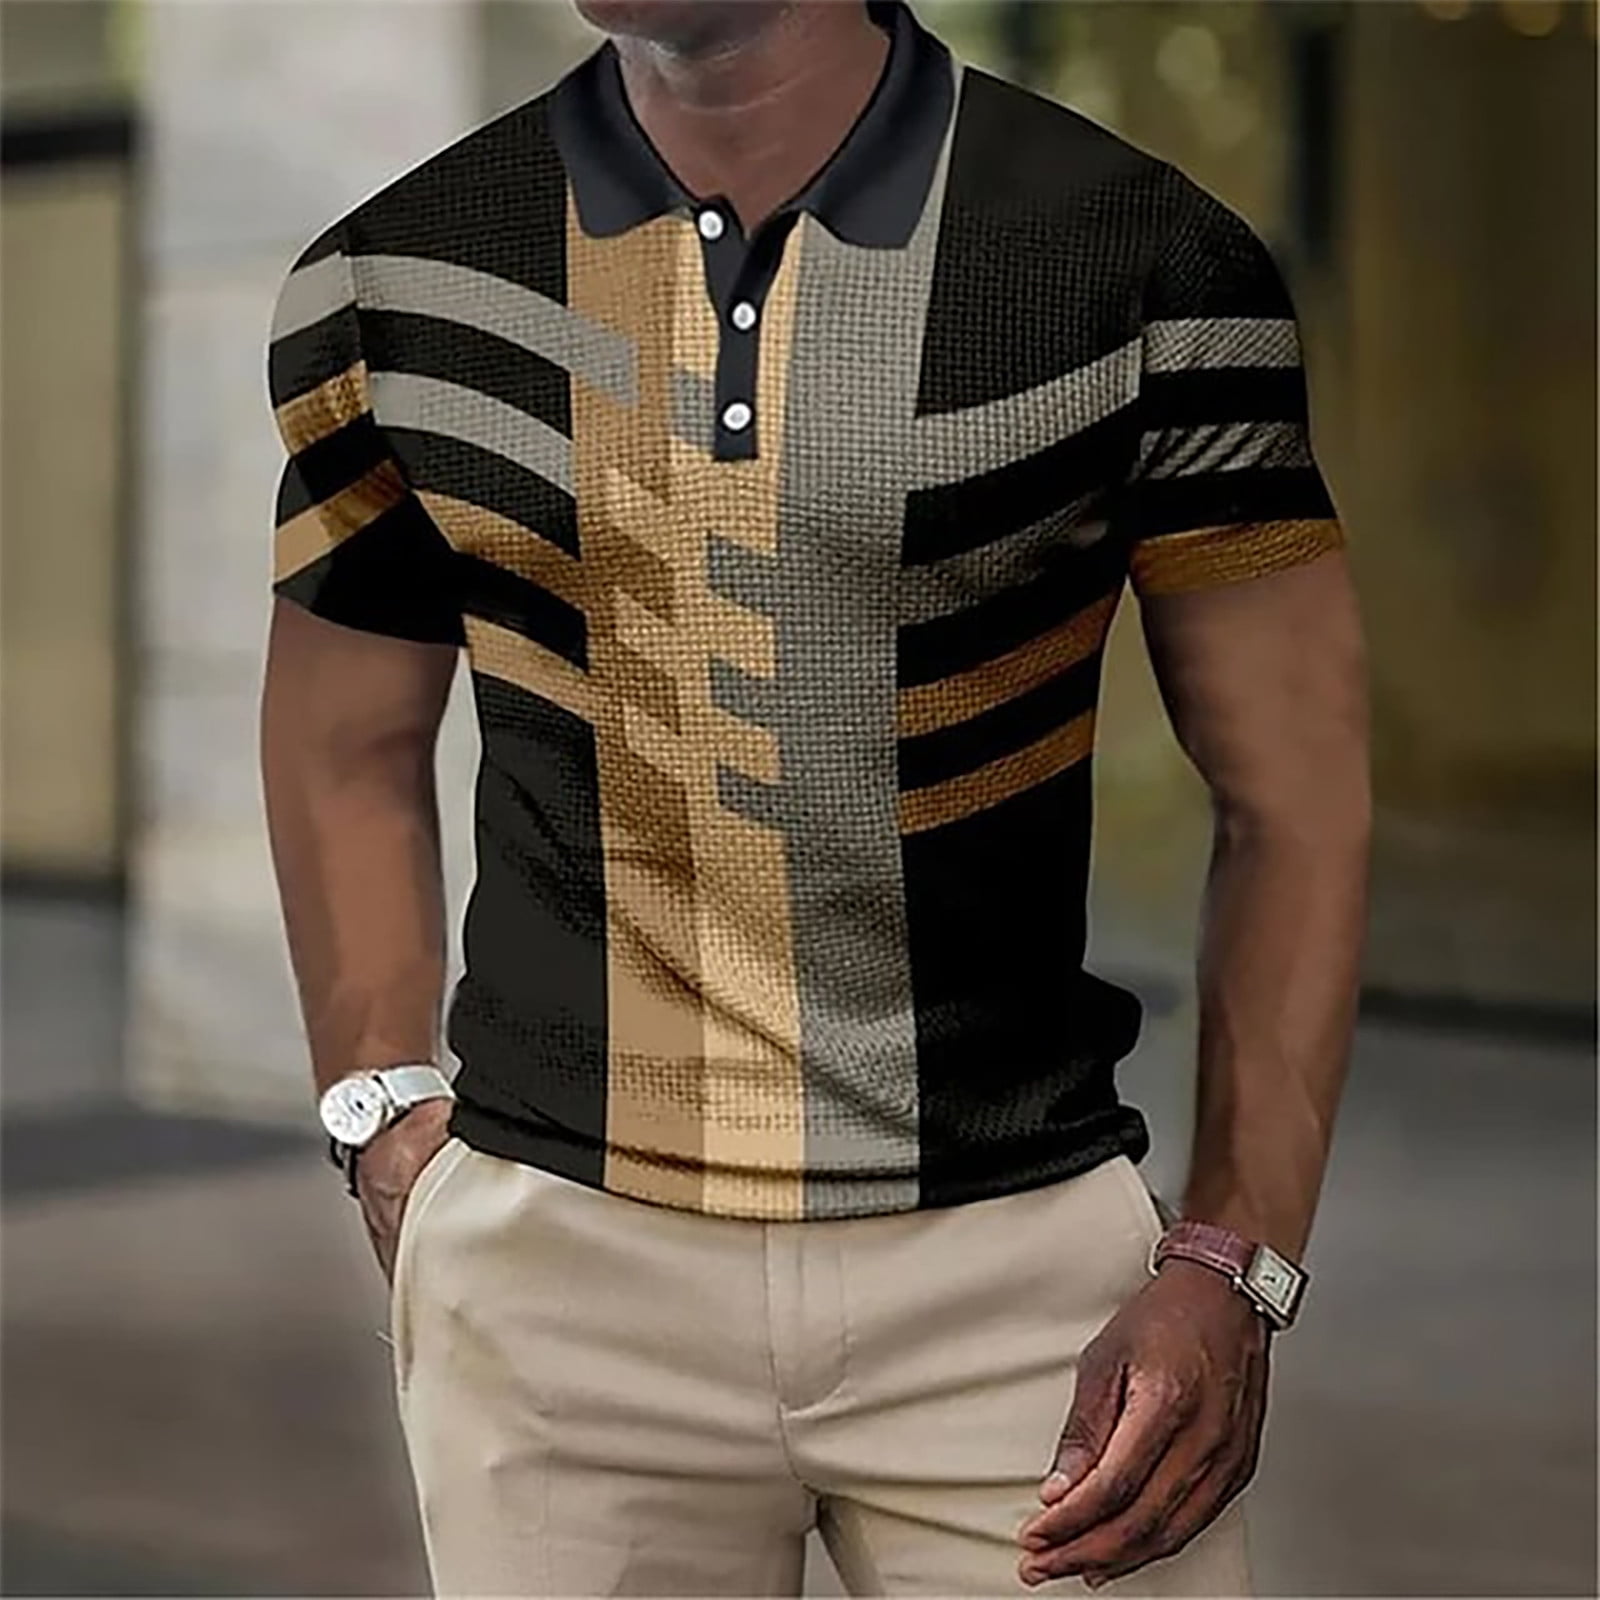 Graphic Short-Sleeved Shirt - Men - Ready-to-Wear